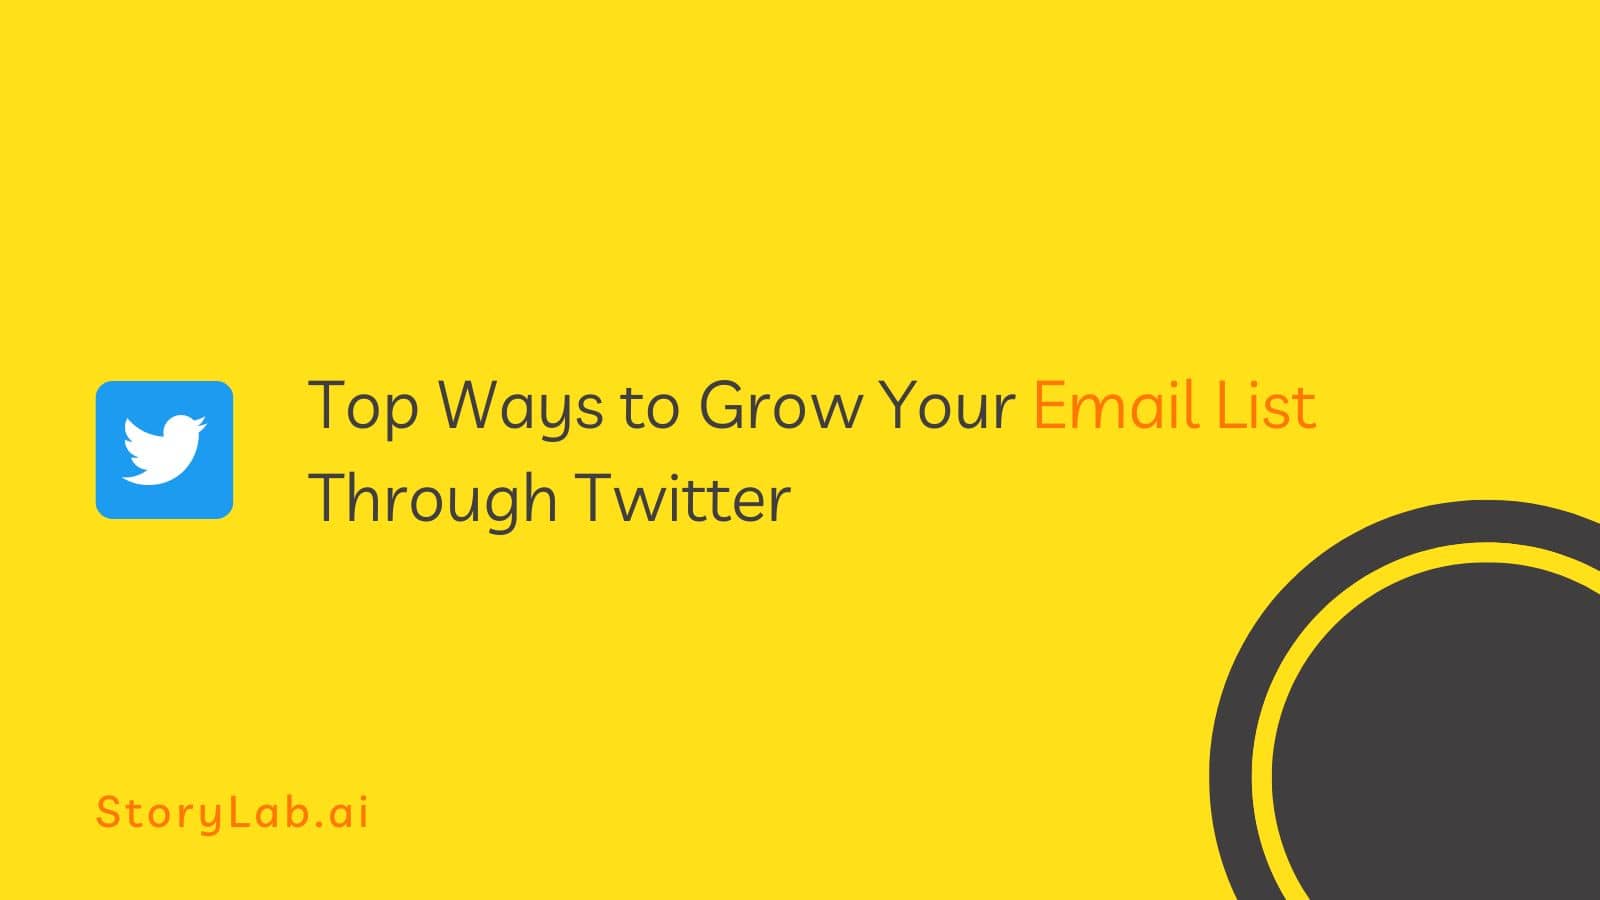 Top Ways to Grow Your Email List Through Twitter